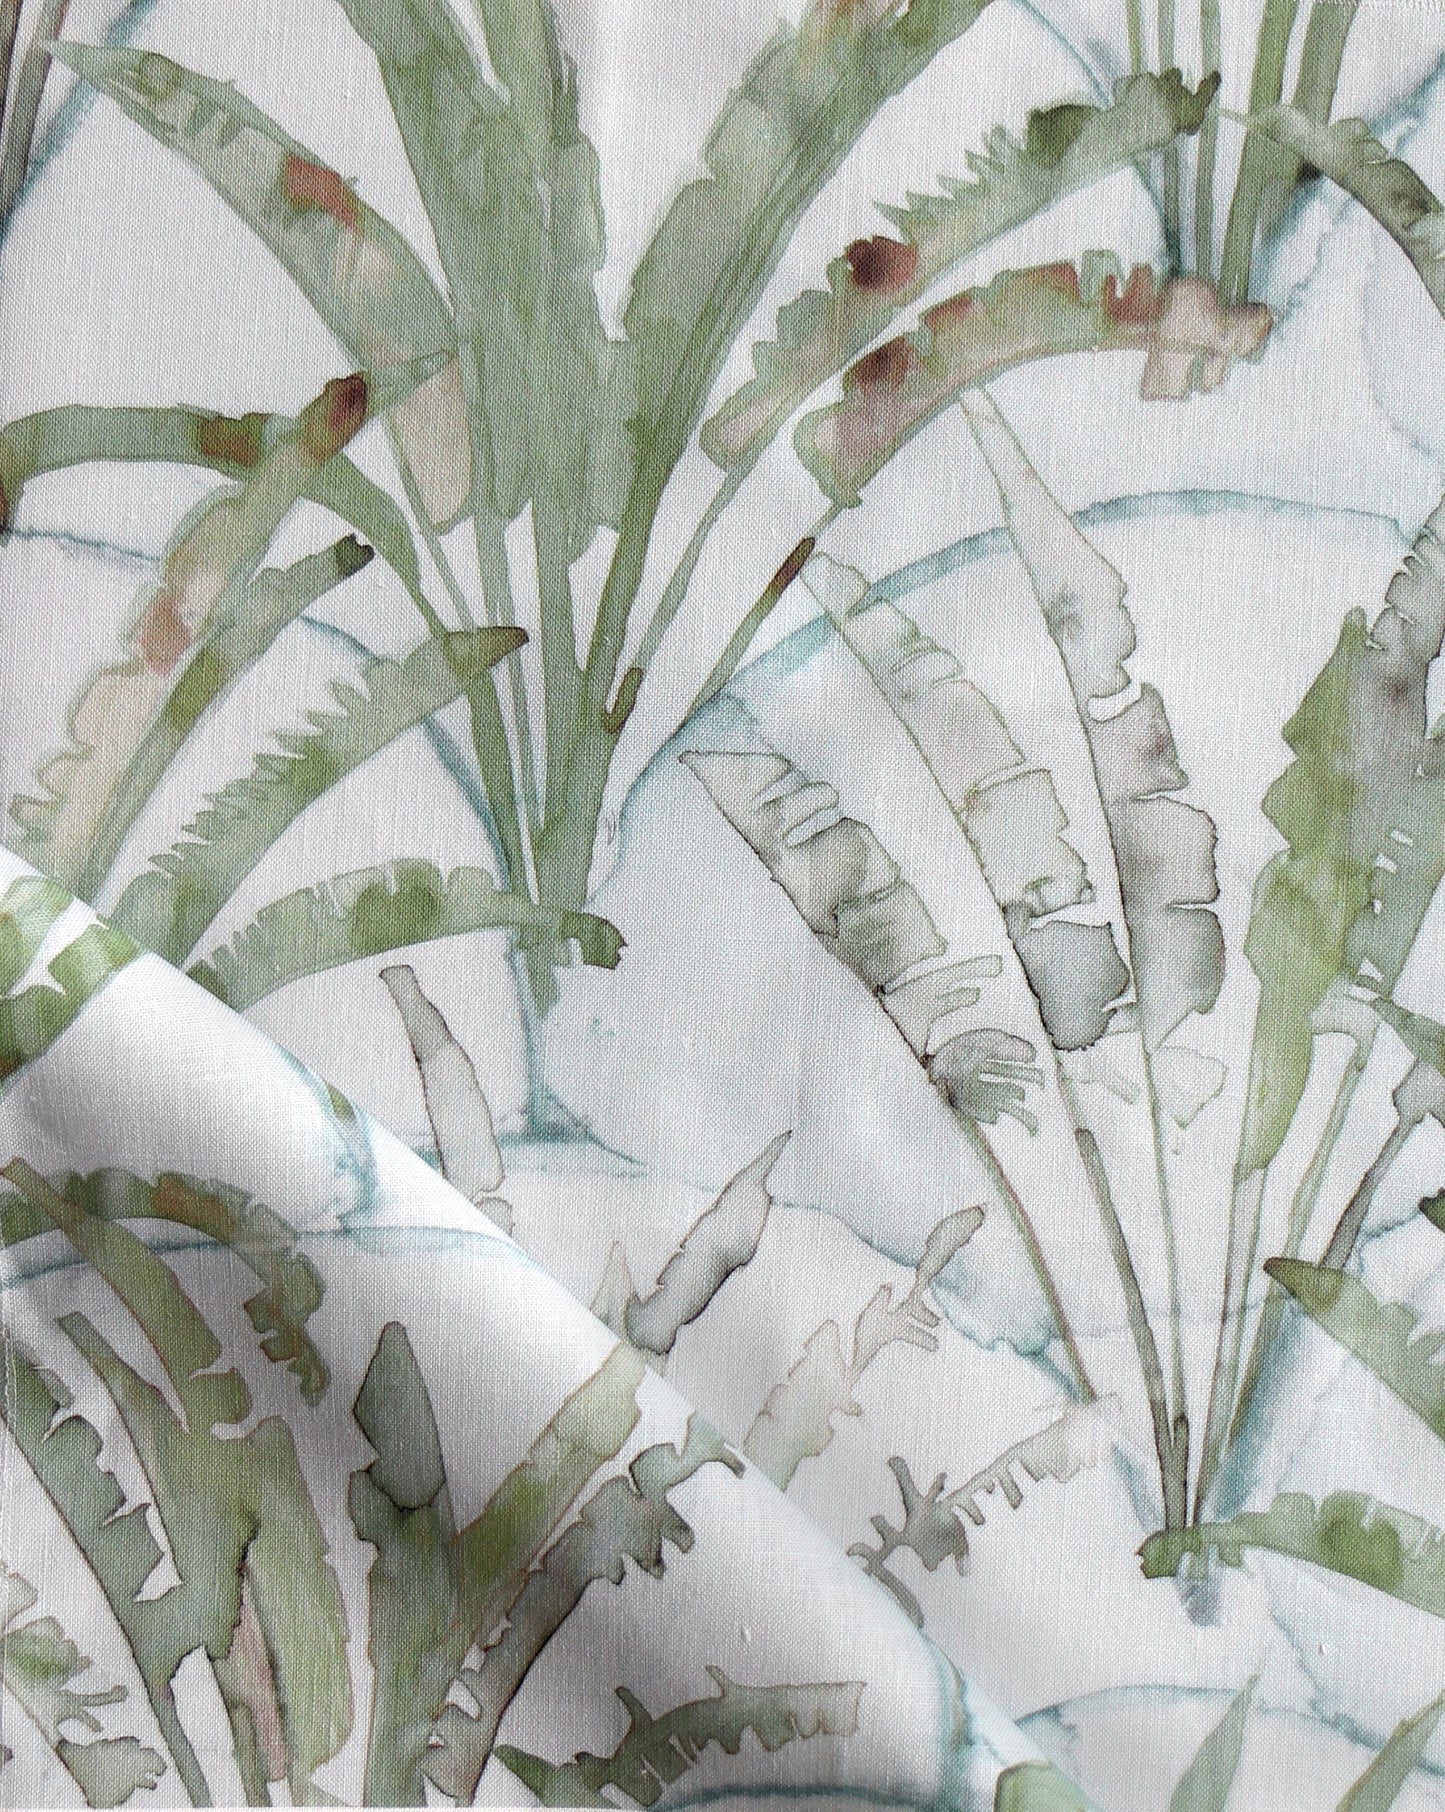 Travelers Palm displays fan-like trees arrayed against a scallop background. In our Sage colorway, the palette is green and blue.